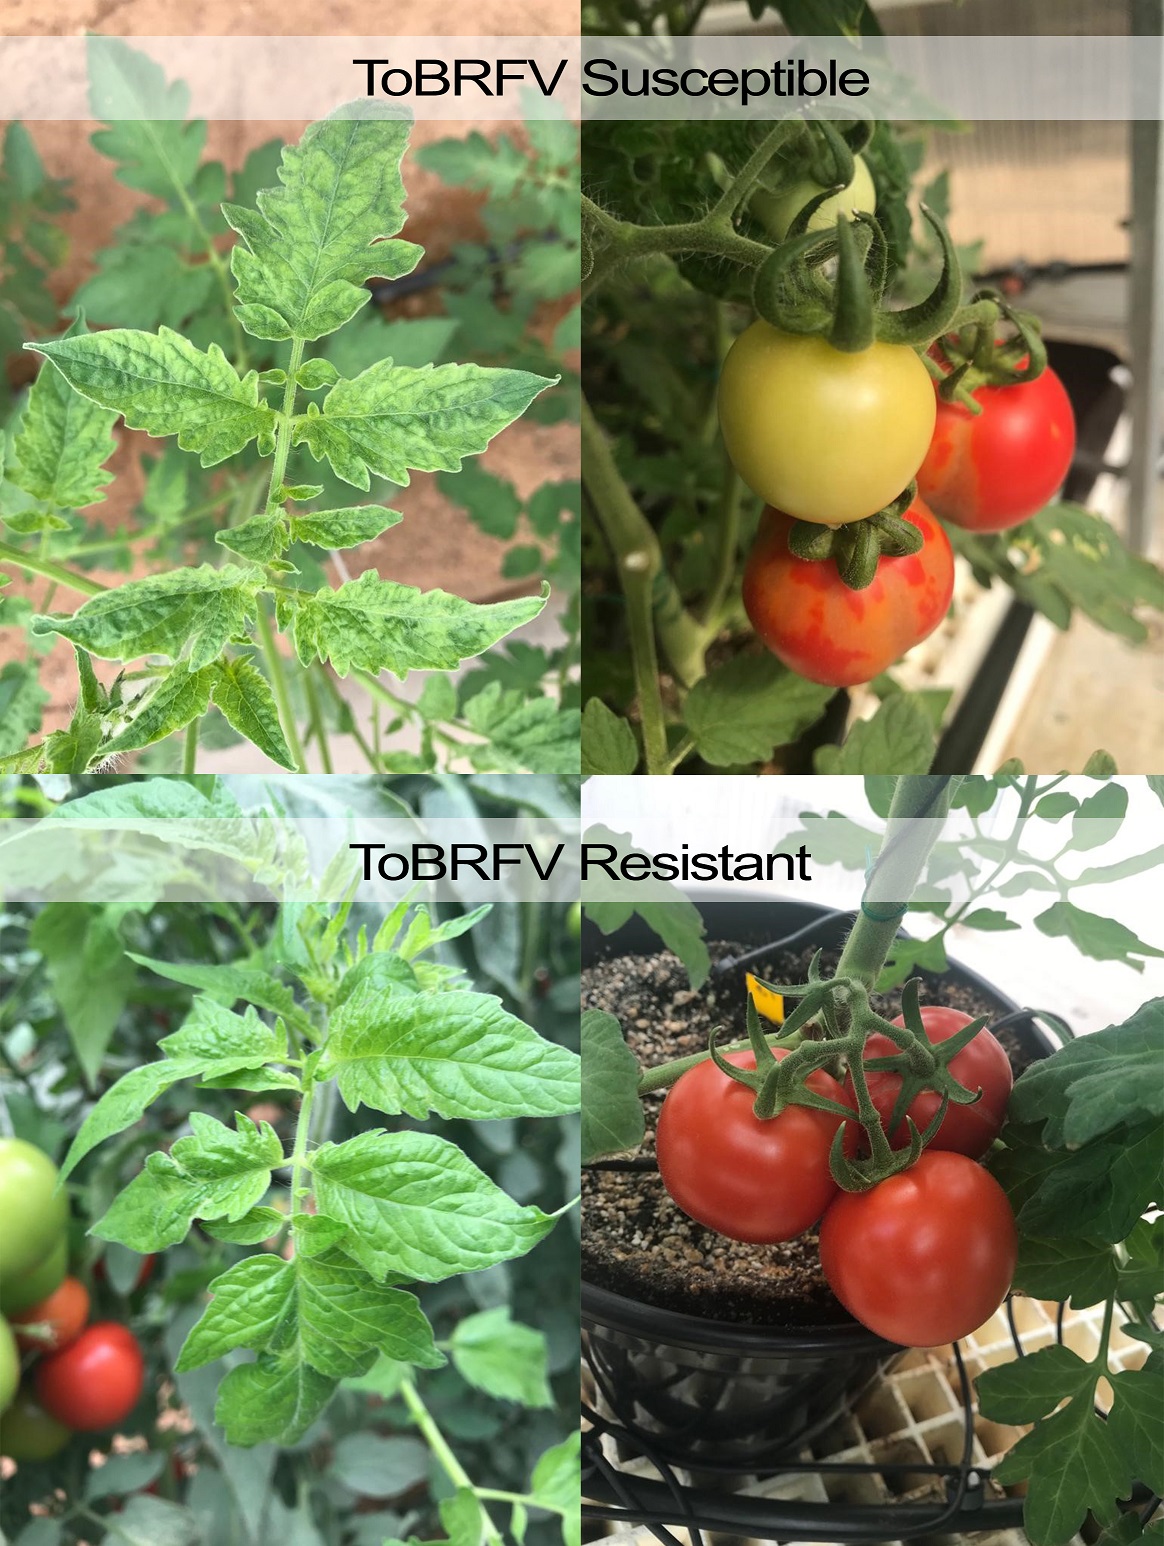 Tomato Pest/ Virus Control - AgTech/ AgriTech and Agriculture